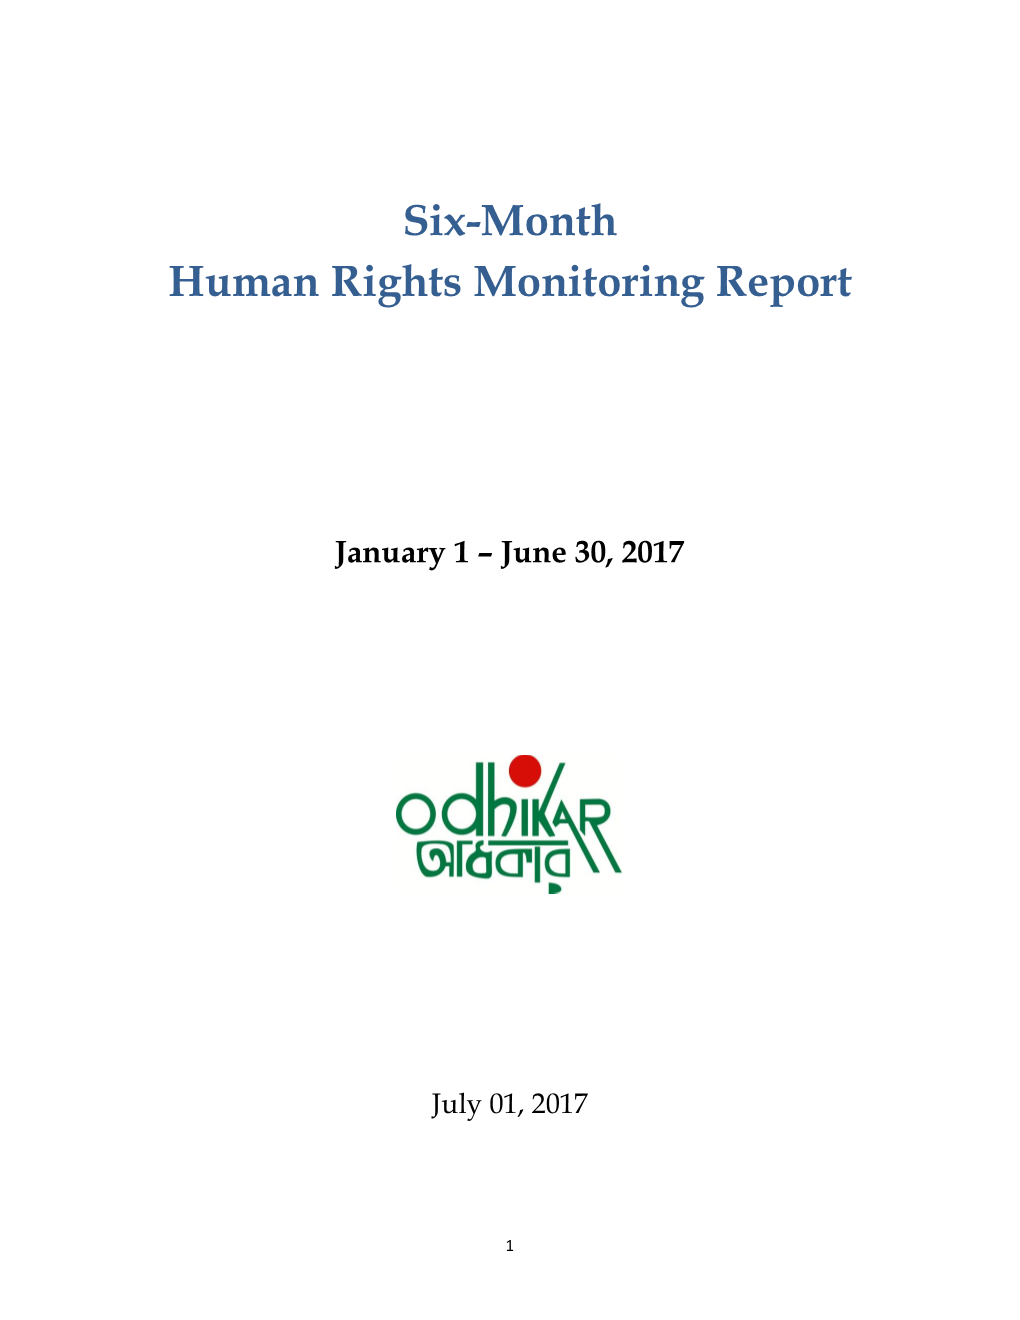 Six-Month Human Rights Monitoring Report